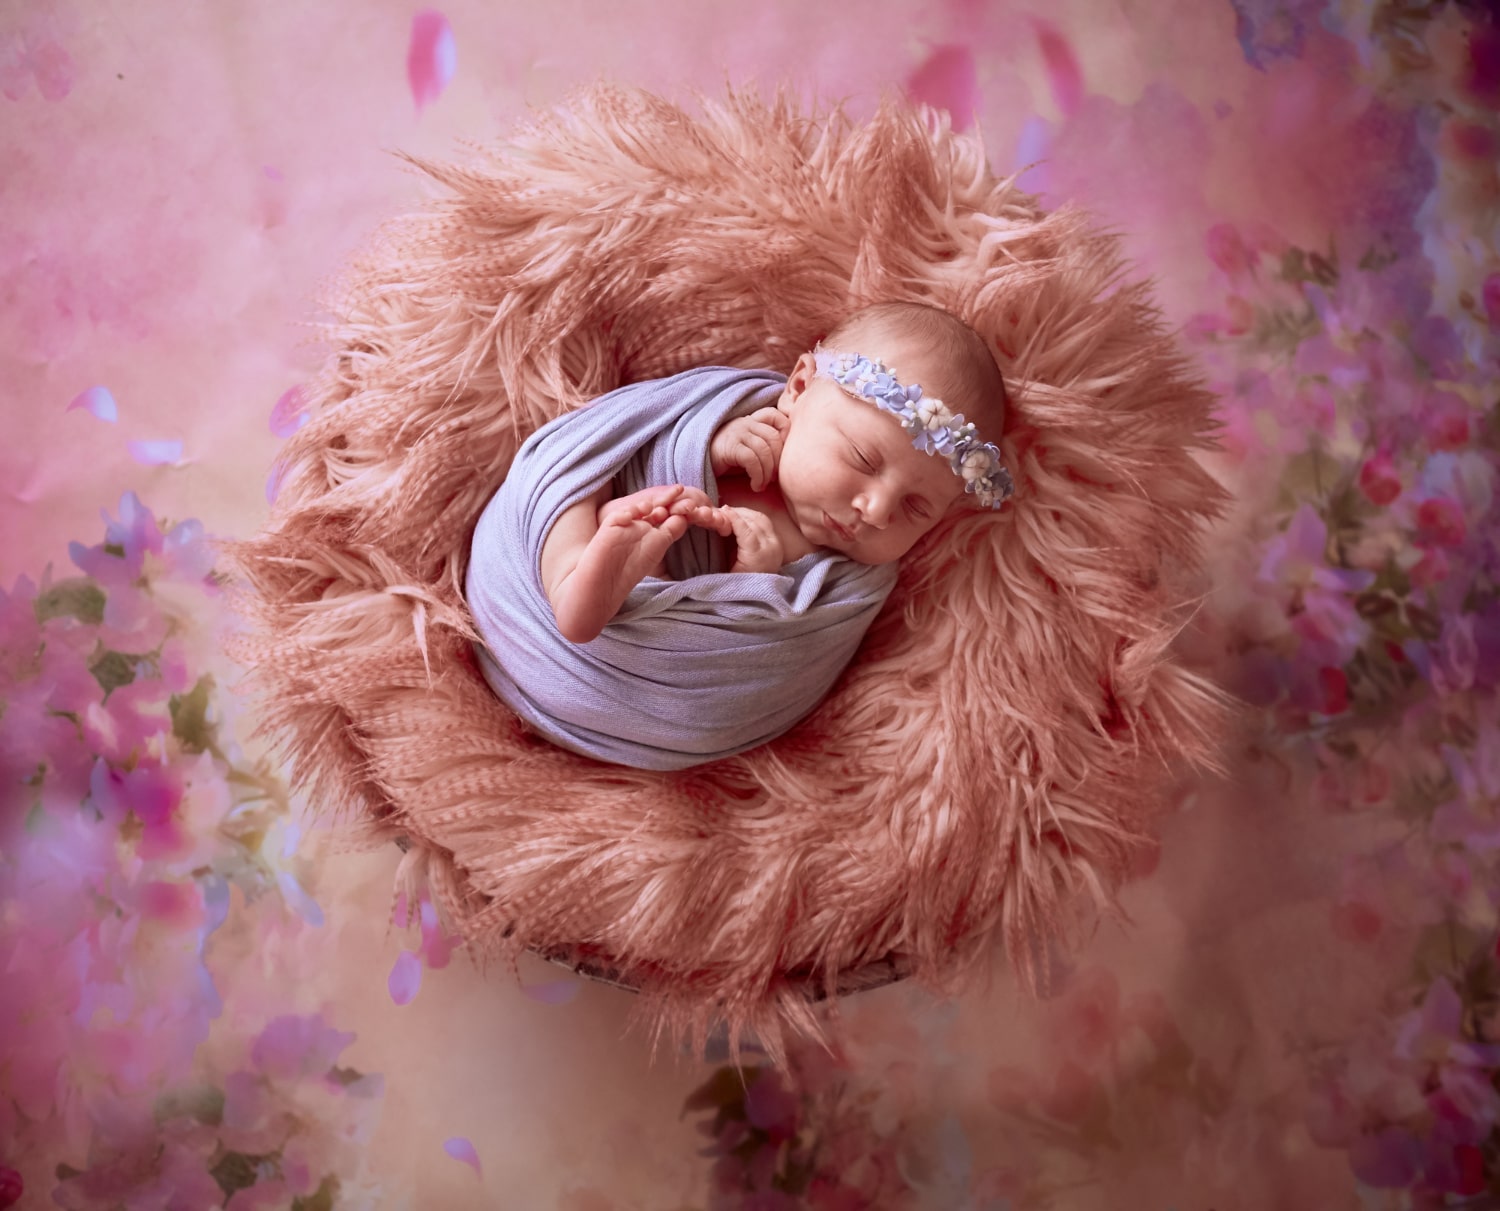 Capturing sweet dreams in a newborn baby photoshoot